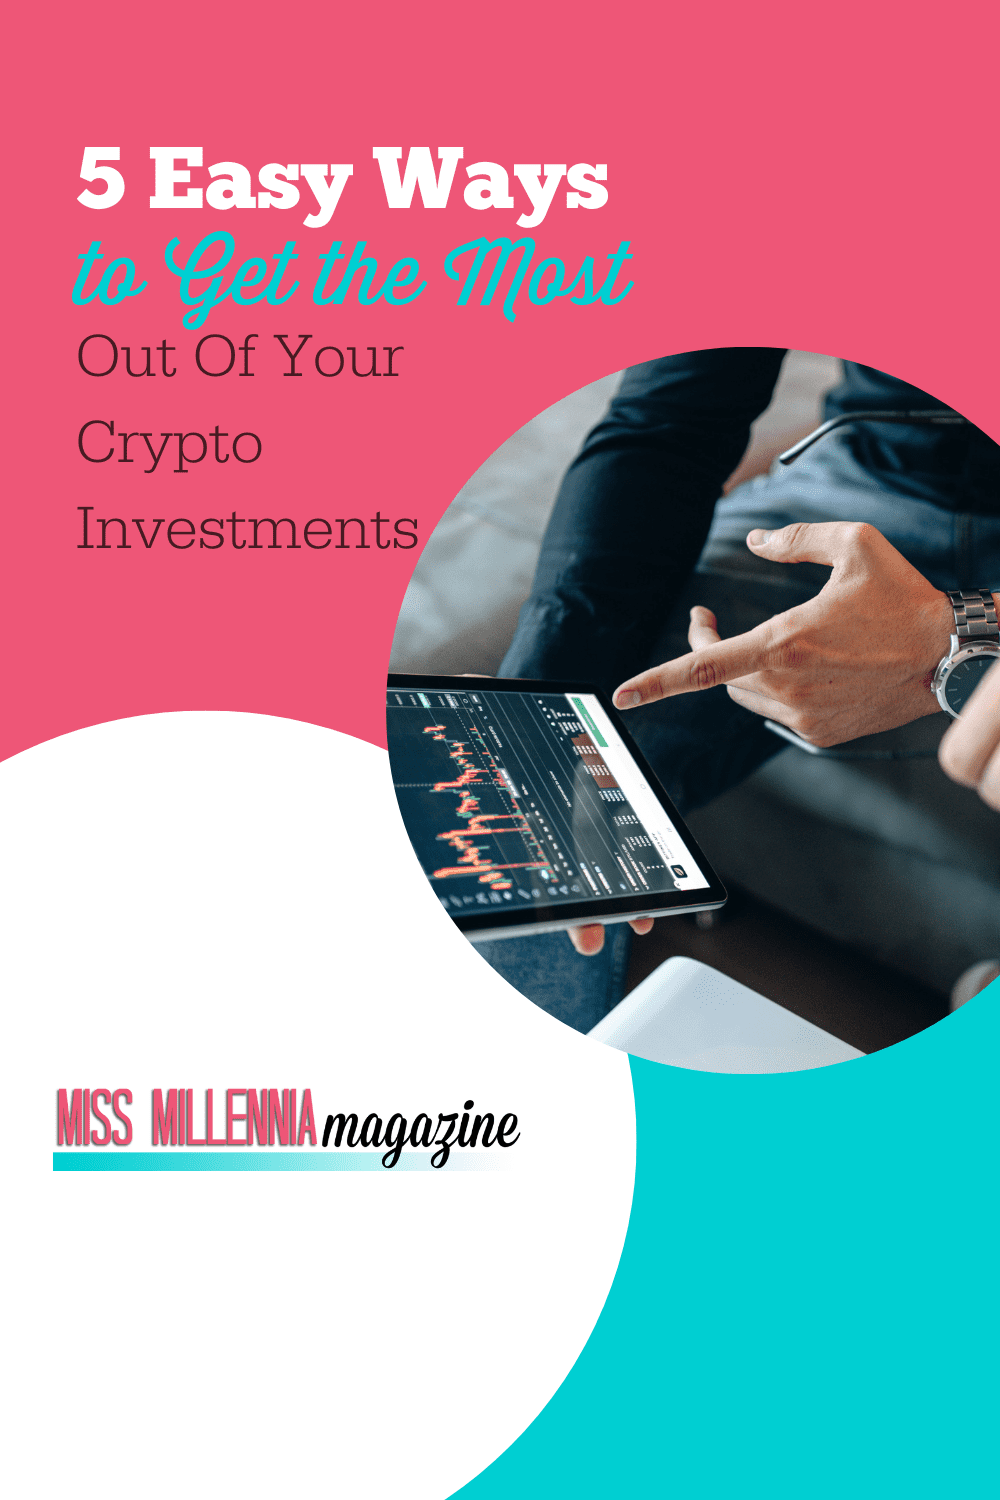 5 Easy Ways to Get the Most Out Of Your Crypto Investments